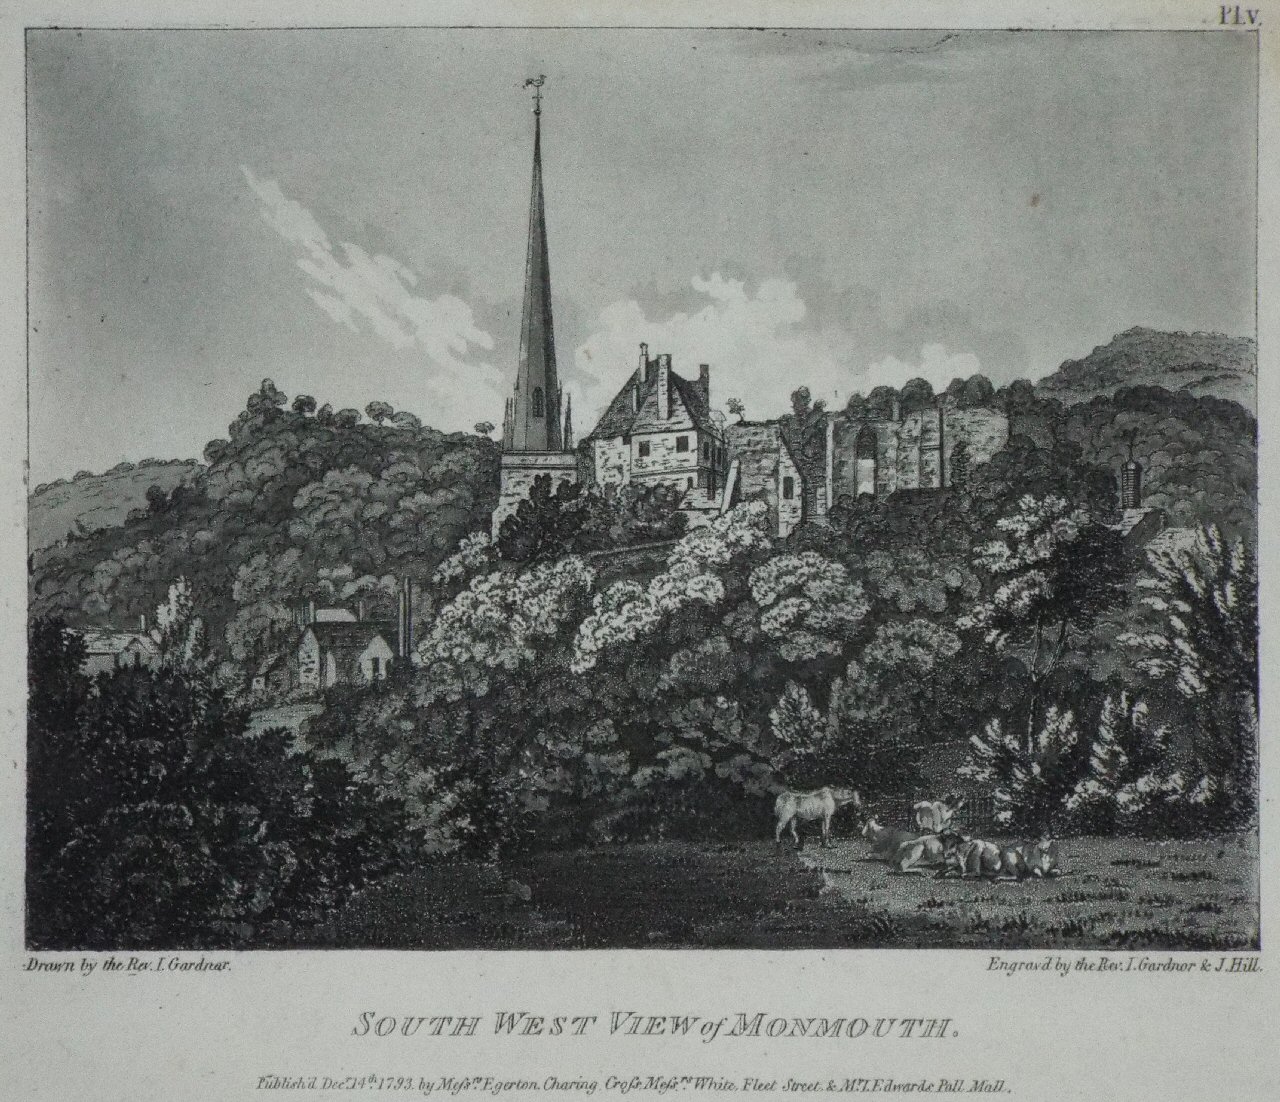 Aquatint - South West View of Monmouth. - Gardner